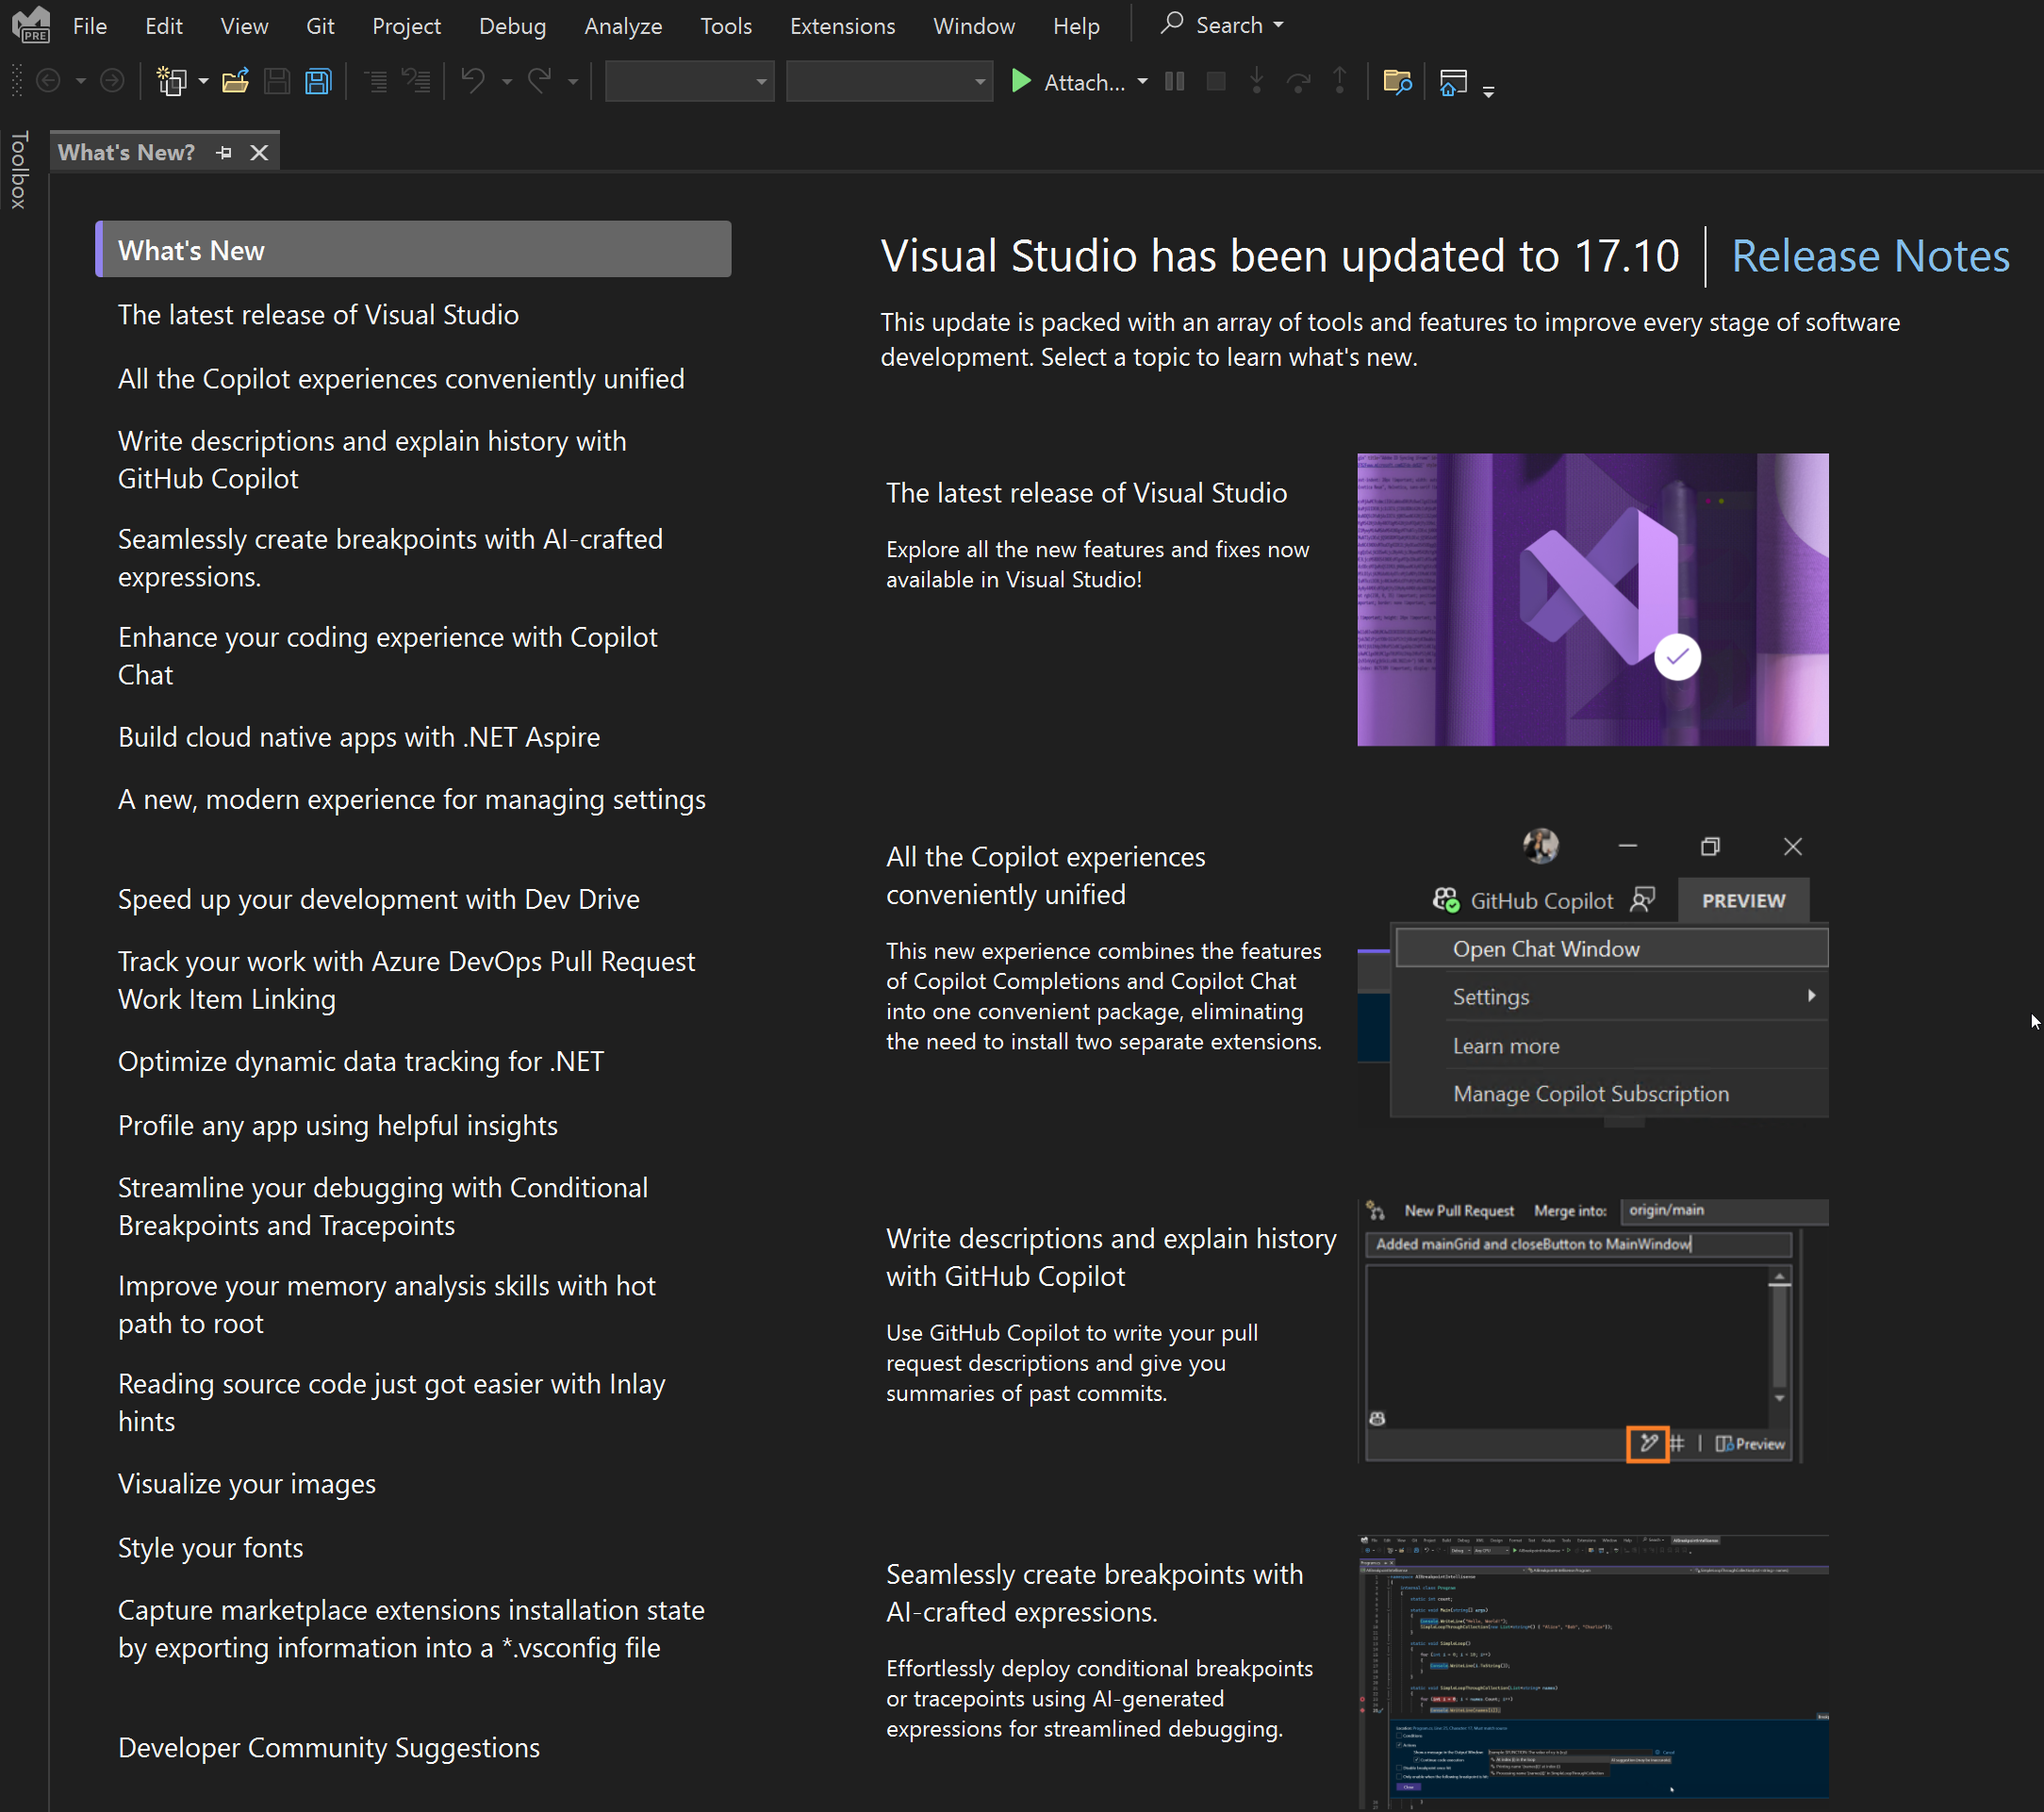 Visual Studio 2022 for Mac is now available - Visual Studio Blog